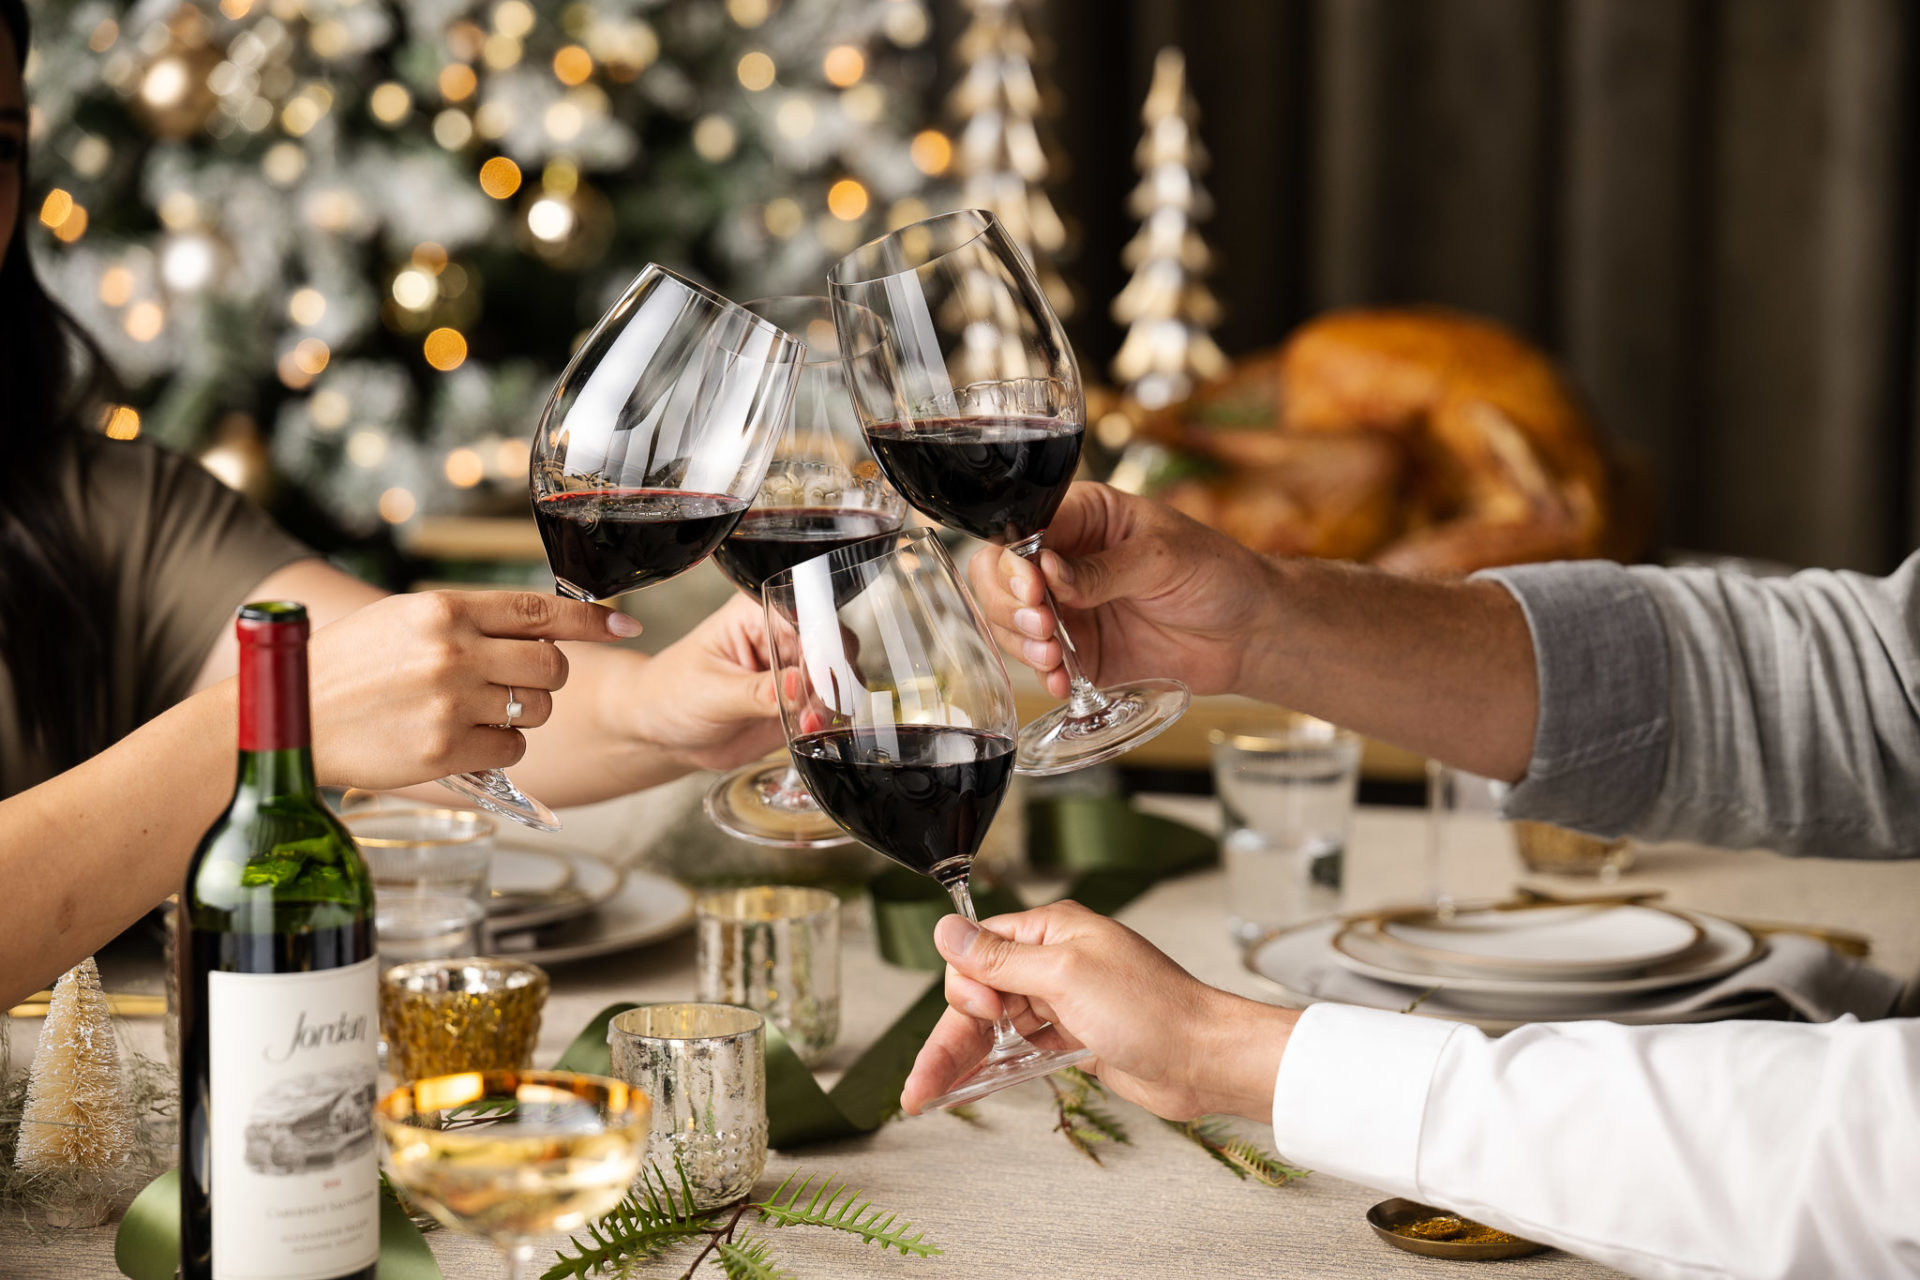 Three people toasting with glasses of cabernet seated around festive table decorated for the holidays with a lit Christmas tree and roast turkey in the background